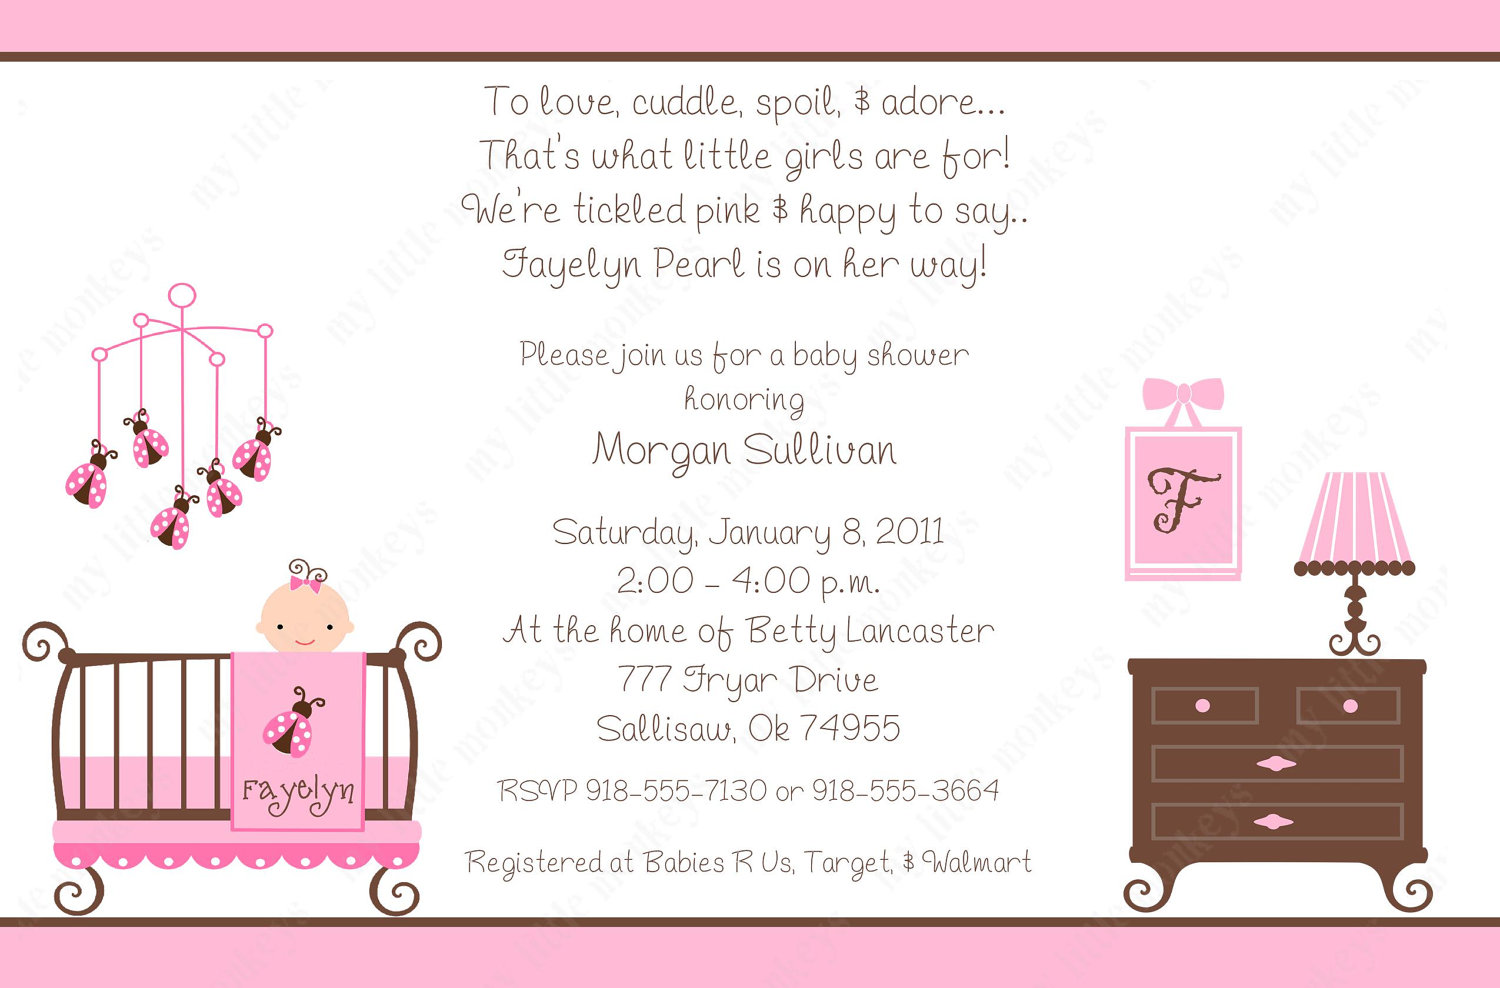 Full Size of Baby Shower:nursery Themes For Girls Baby Girl Party Plates Girl Baby Shower Decorations Baby Shower Decorations For Girls Baby Girl Themes For Baby Shower Baby Shower Themes Baby Shower Ideas Baby Shower Decorations Printable Baby Shower Invitations For Girl